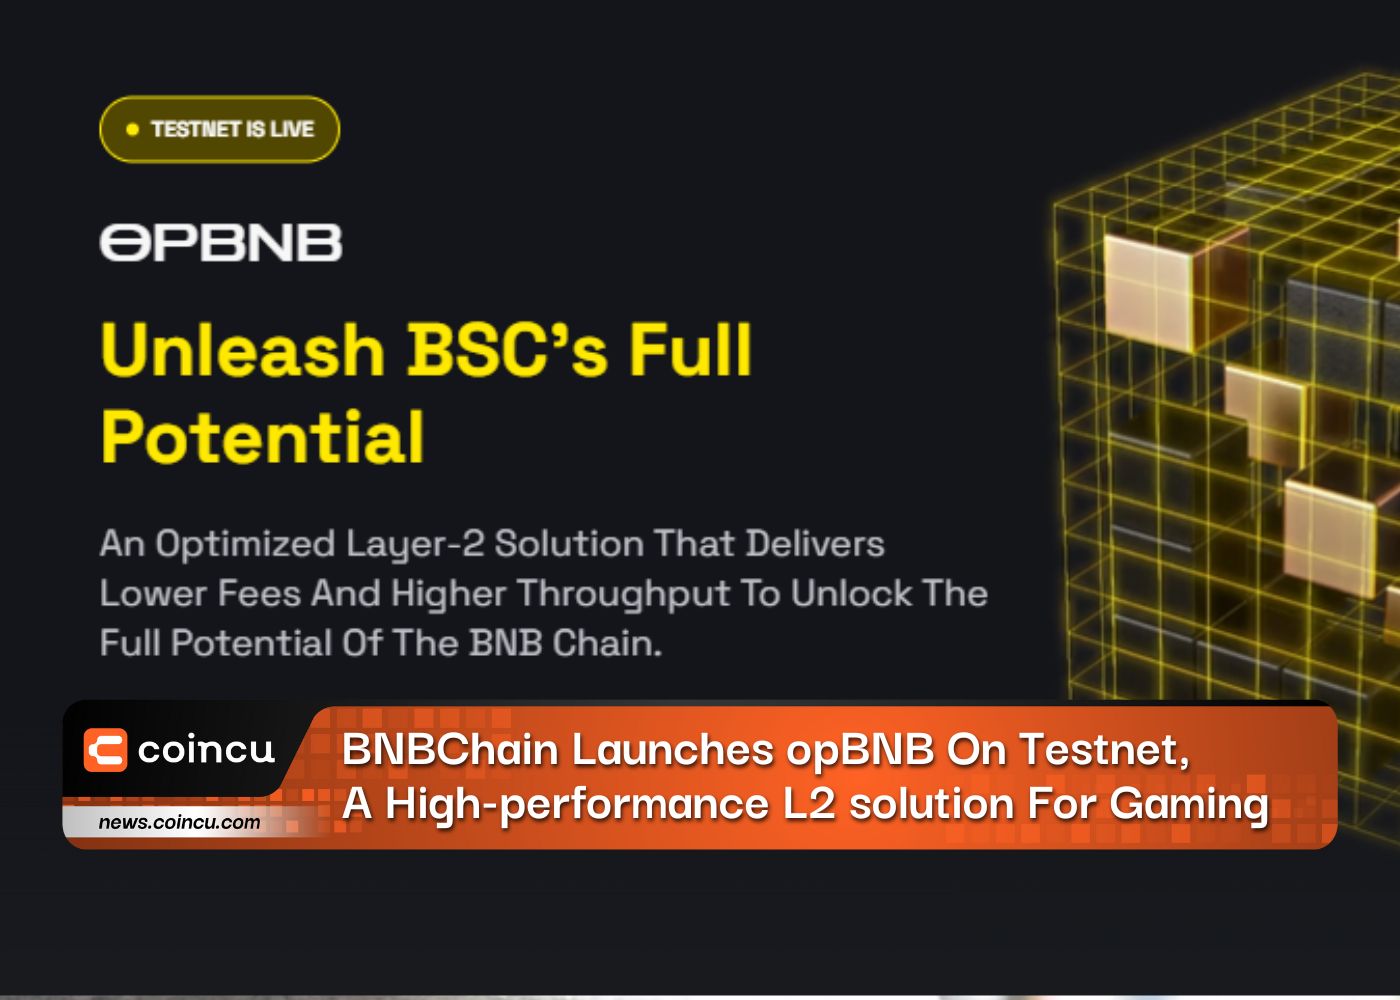 BNBChain Launches opBNB On Testnet, A High-performance L2 solution For Gaming